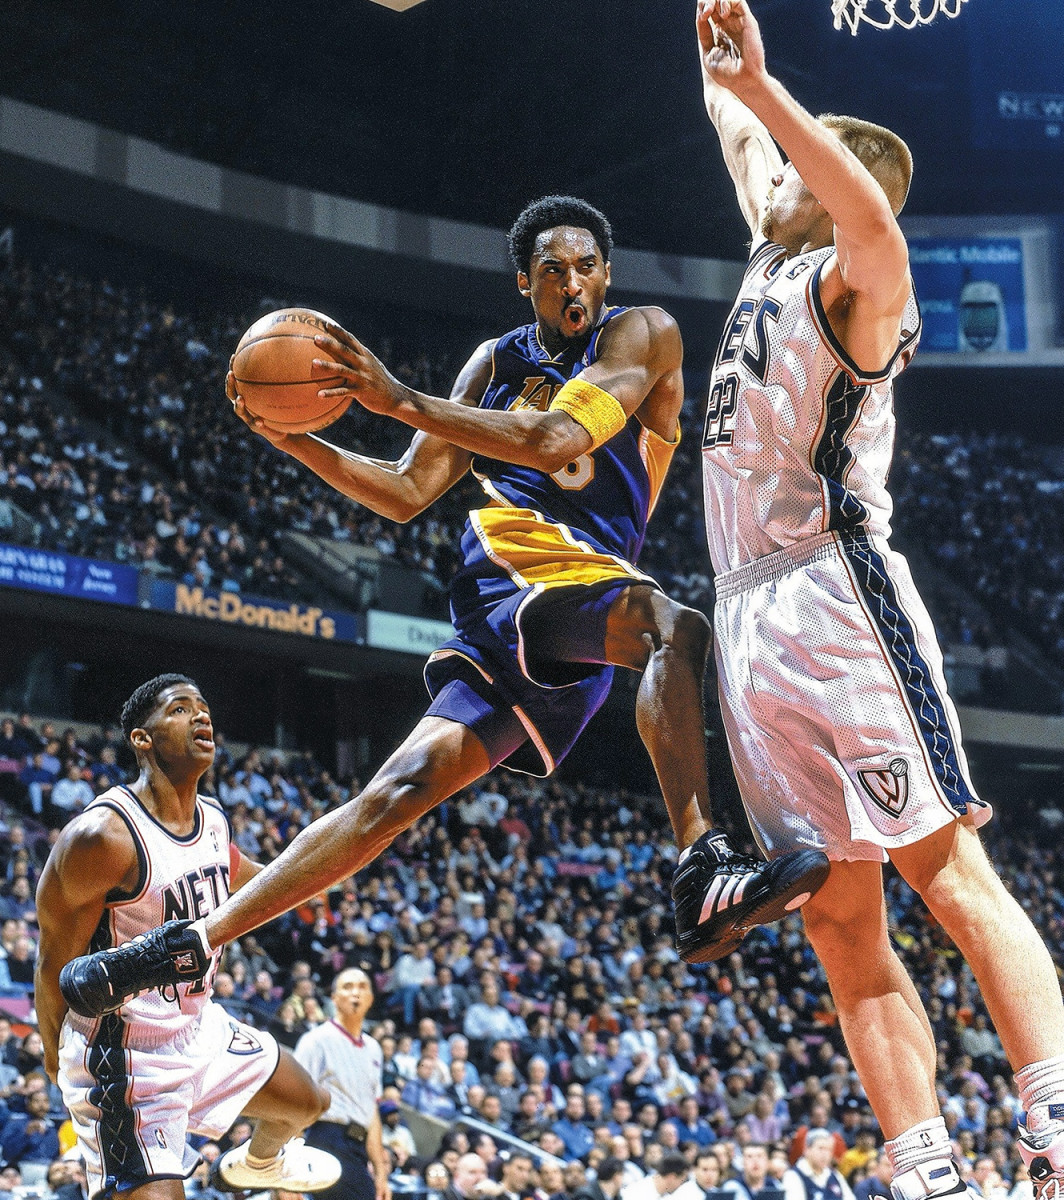 Kobe Bryant pushes the ball upcourt in a white Laker jersey.JPG